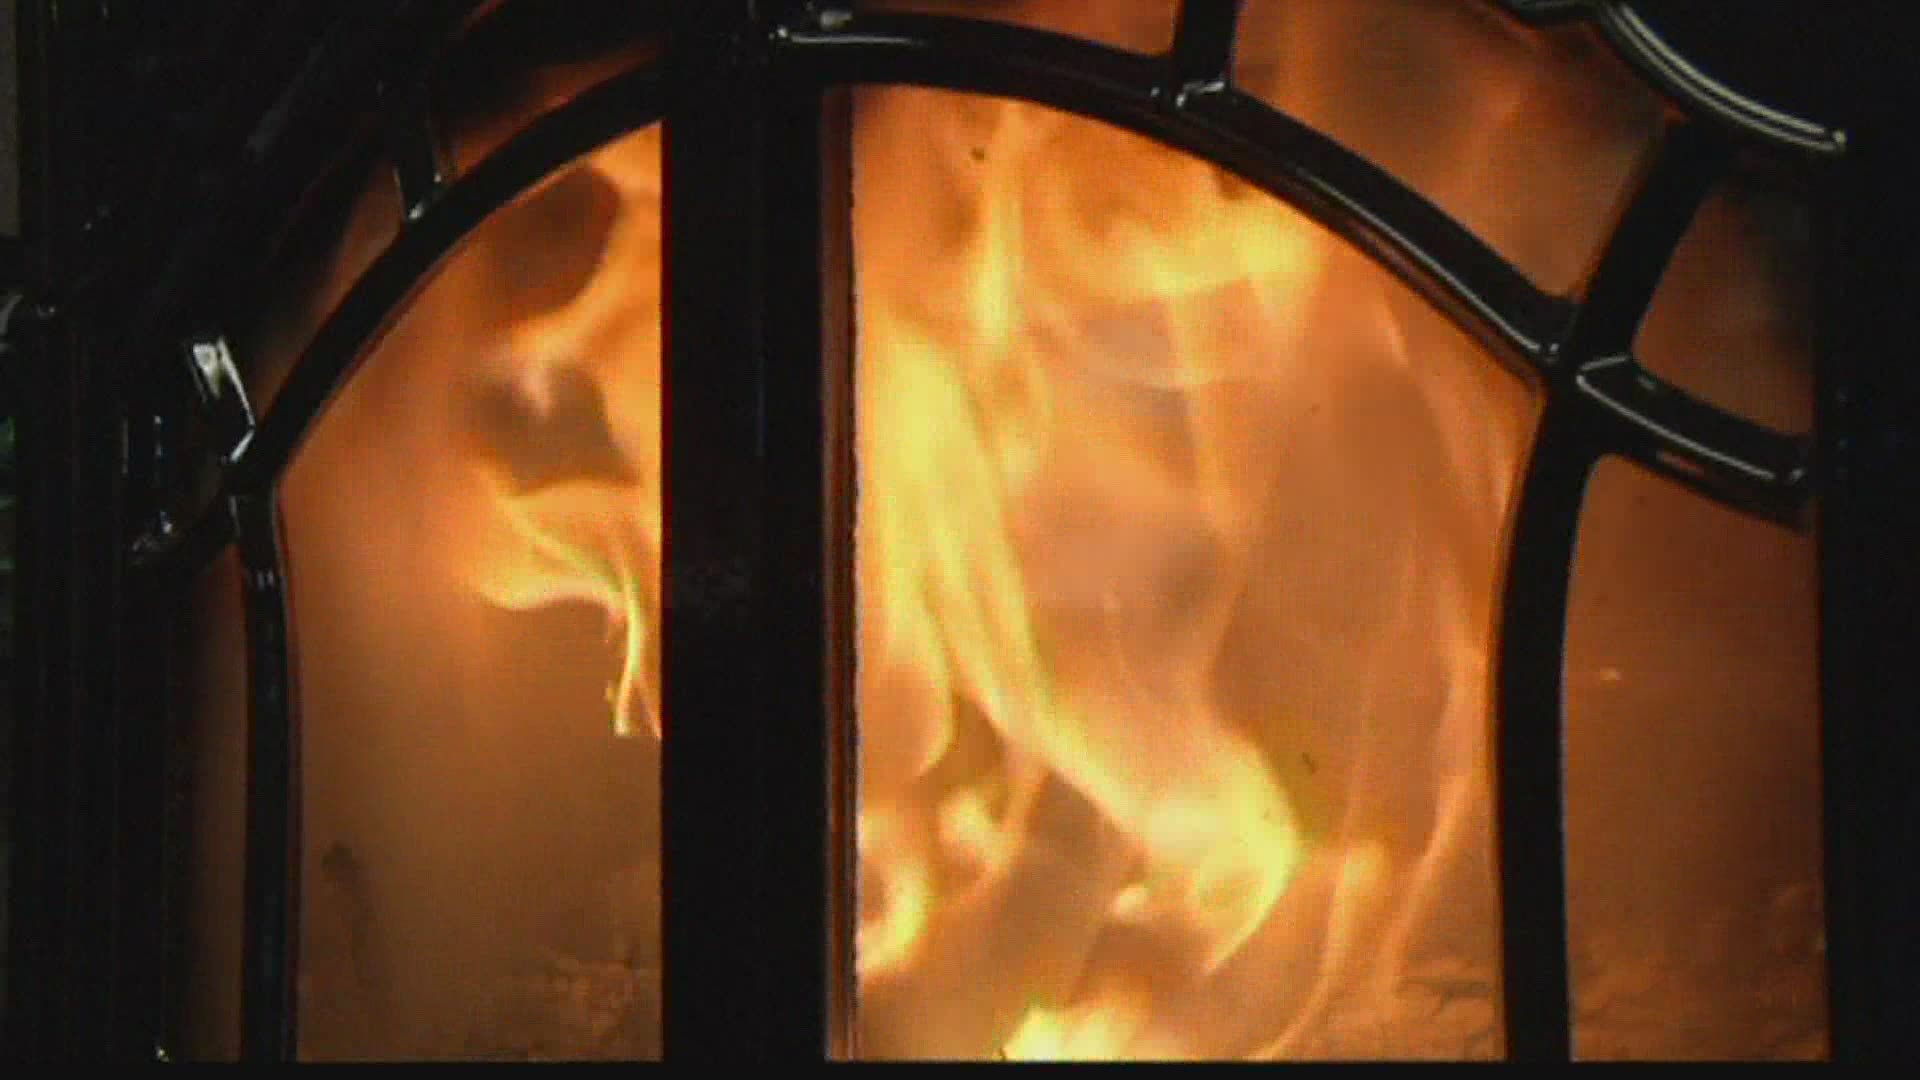 With the cold winter weather settled in, many fireplaces and wood stoves are being used this season across central Indiana. But it can be harmful to your health.